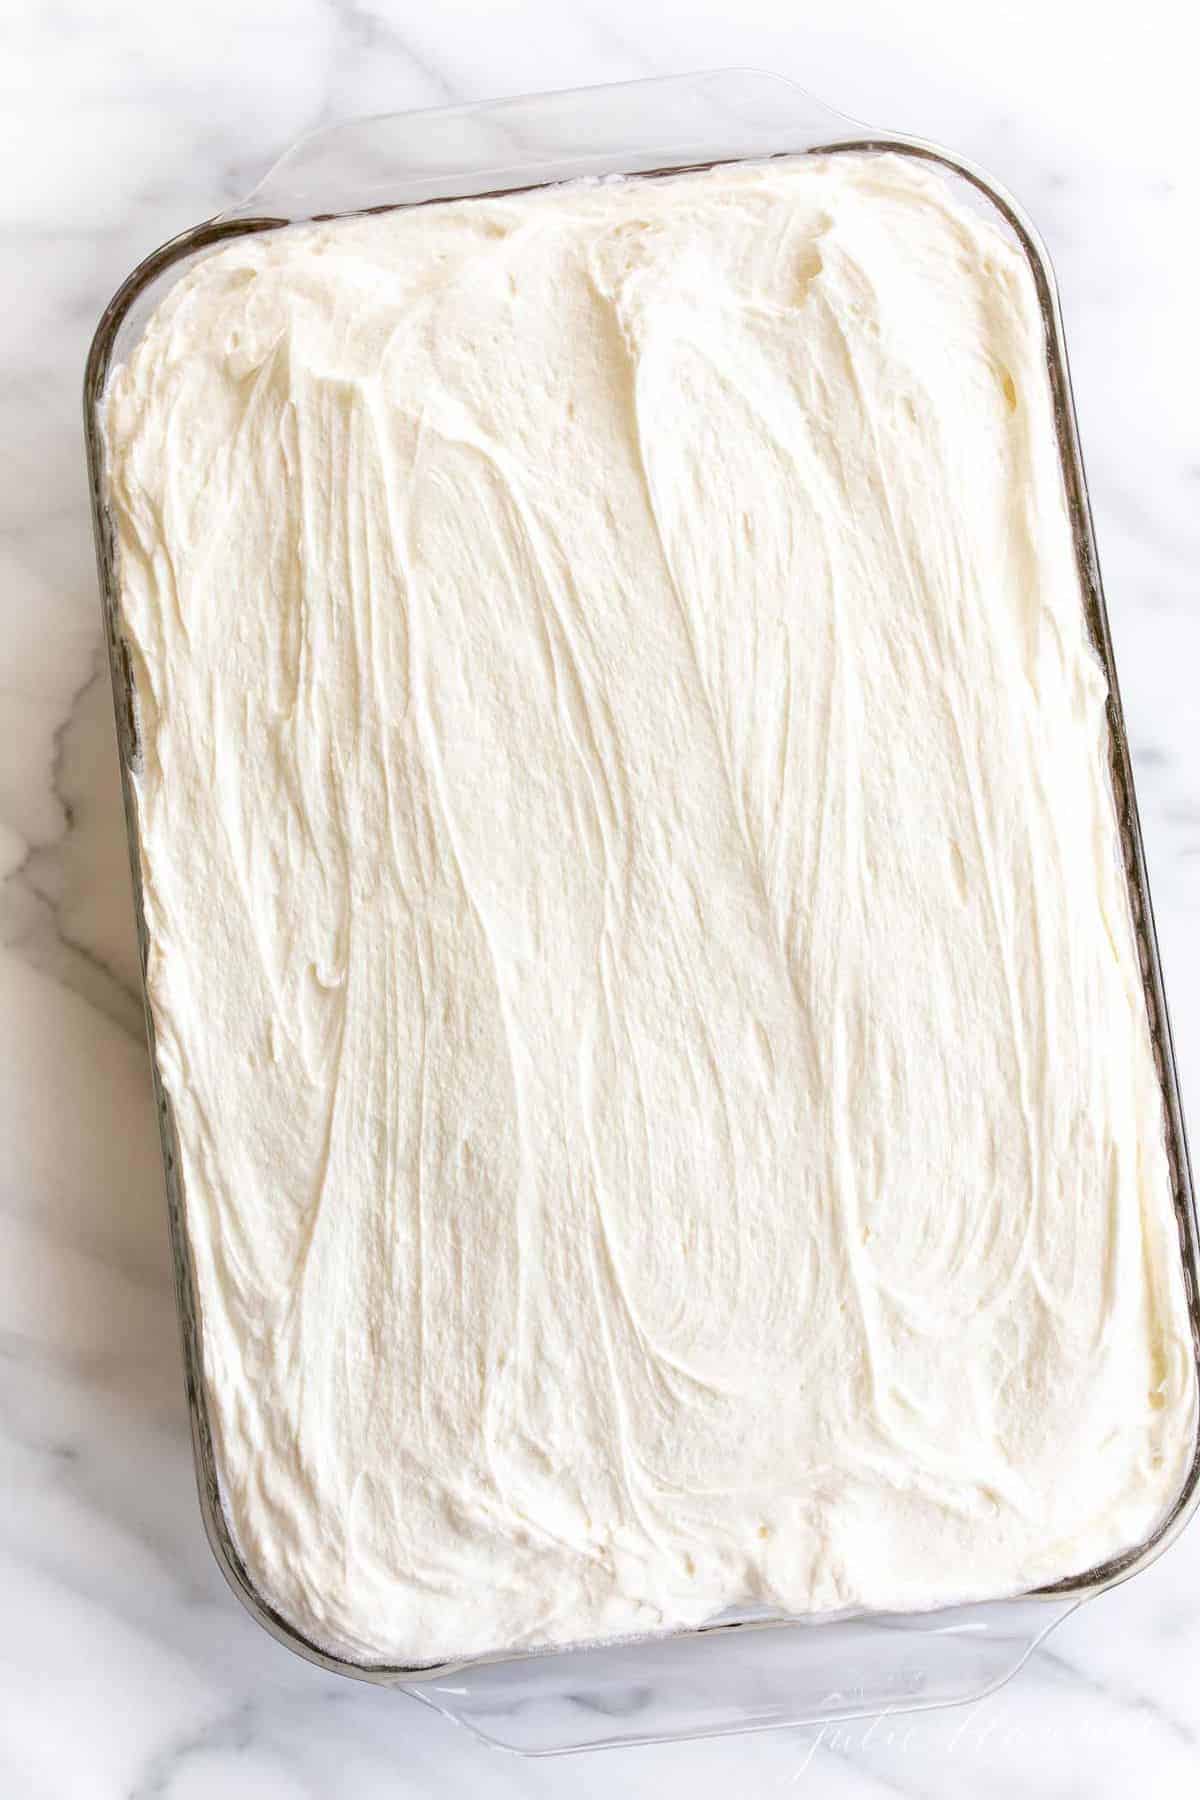 Pumpkin cake frosted with cream cheese frosting on a marble surface.